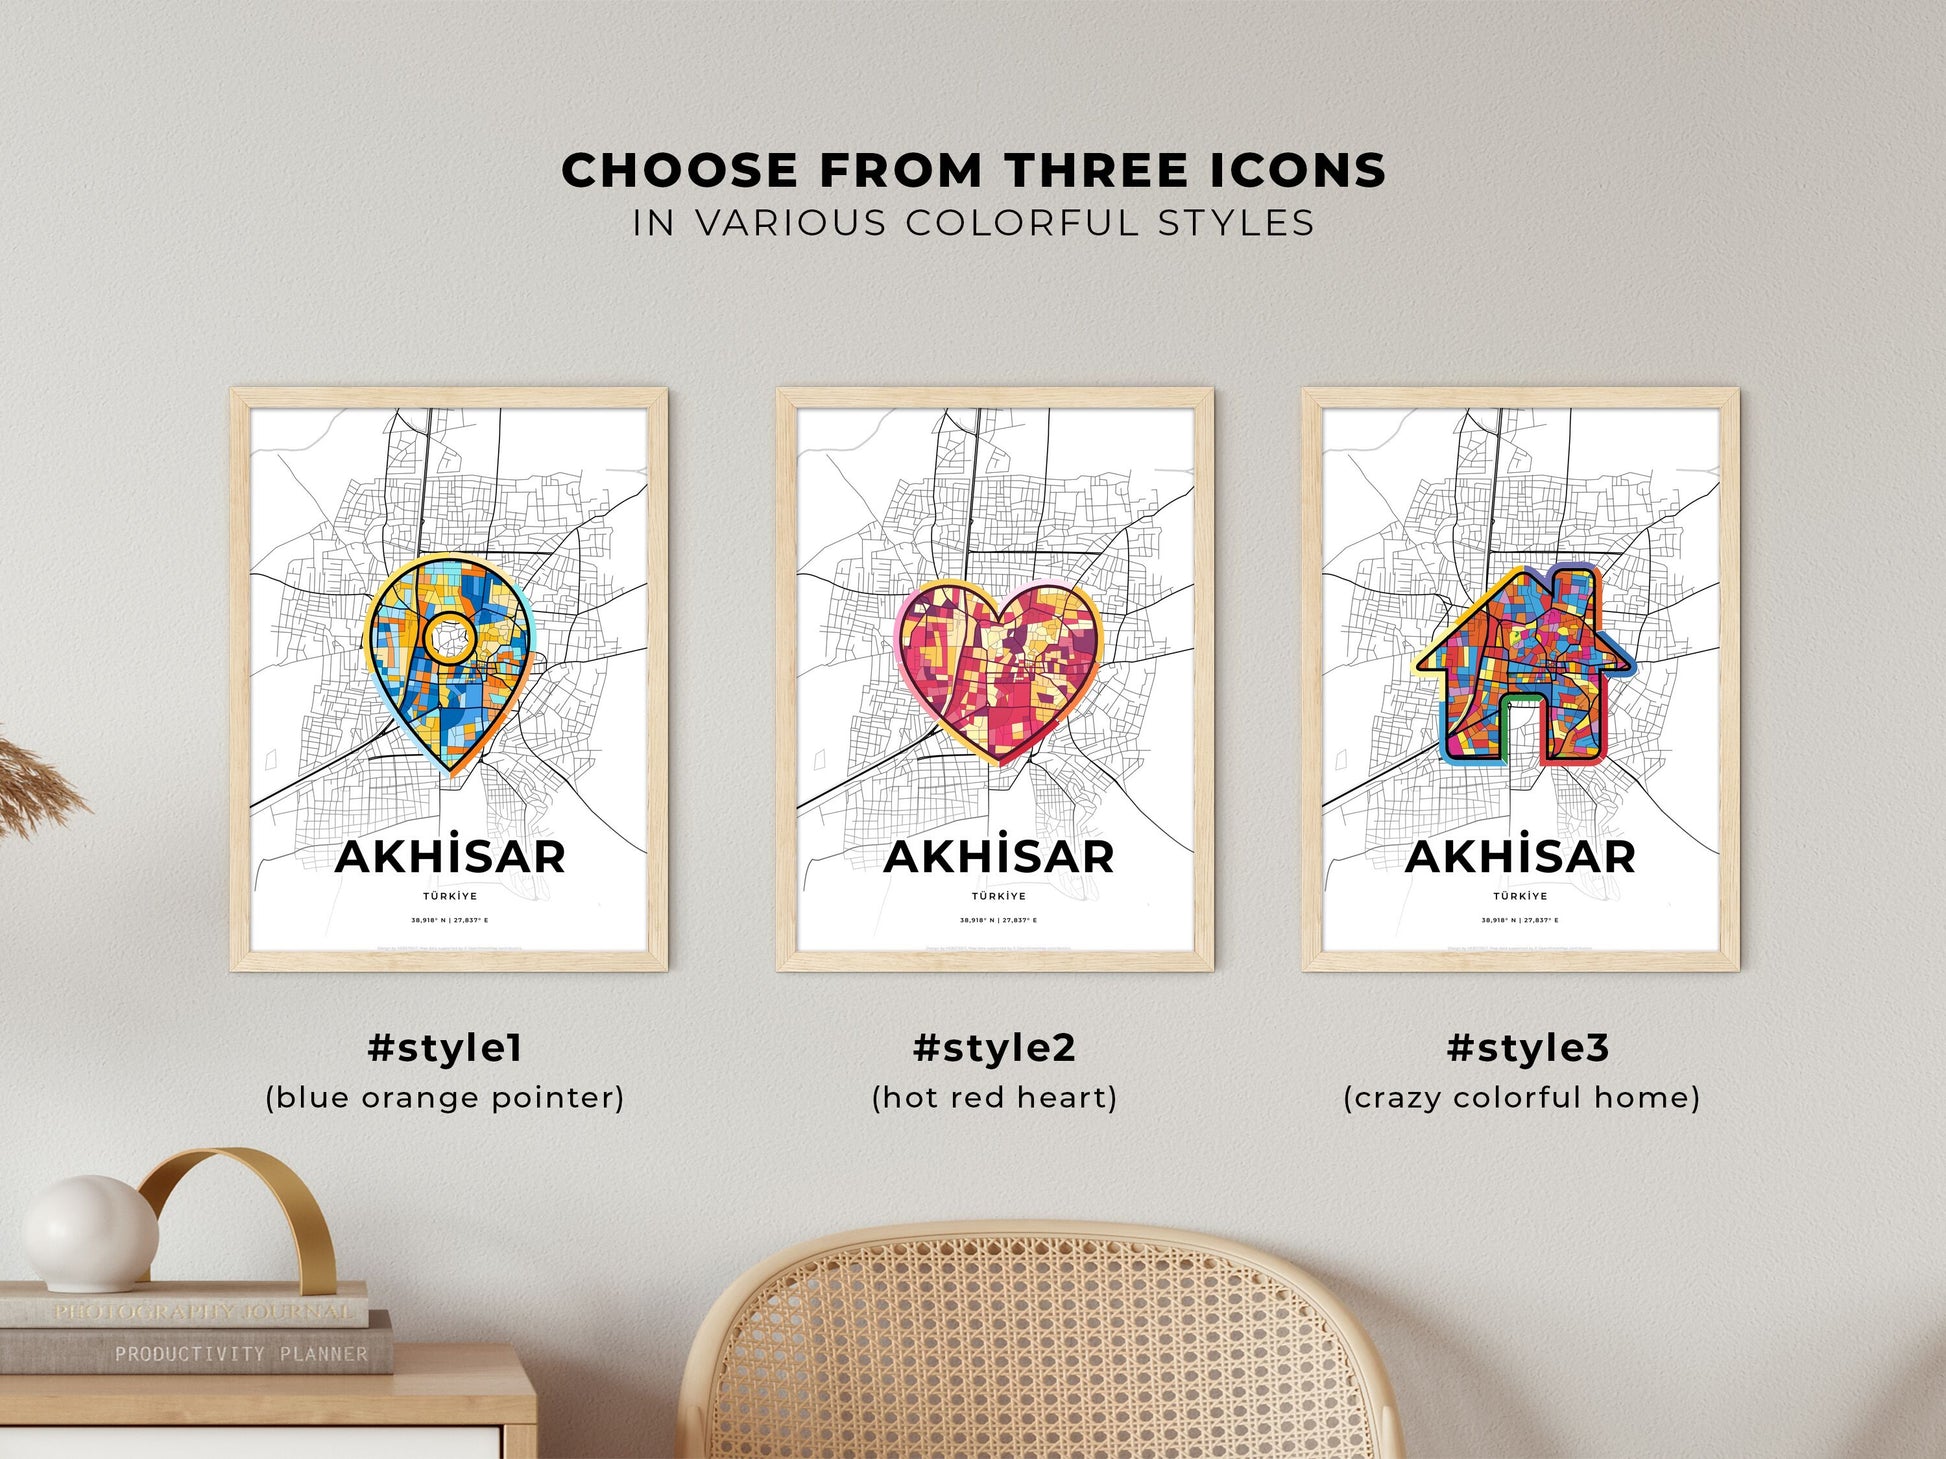 AKHISAR TURKEY minimal art map with a colorful icon. Where it all began, Couple map gift.